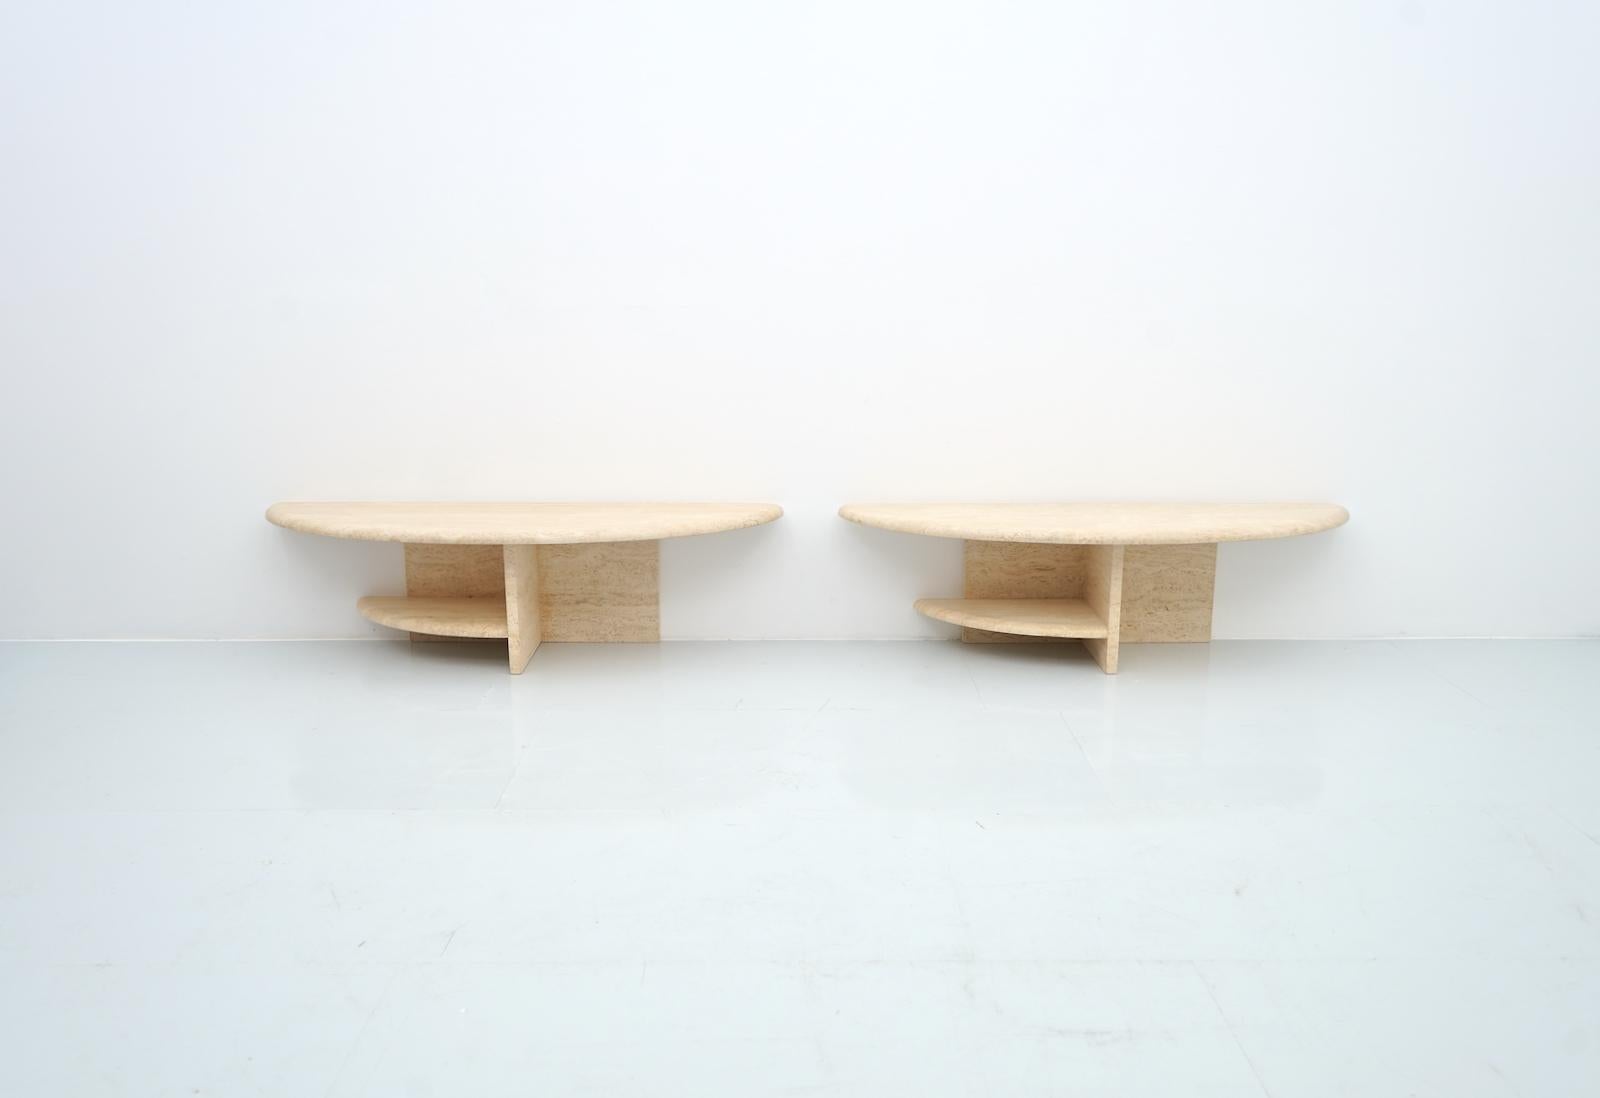 Pair of twin tables in Italian travertine in oval shape.
The tables can be placed together as coffee tables or separately as side tables.
Very nice shape, great stone.
Measurements each table: W 140 cm, D 45 cm, H 39 cm
Very good condition.